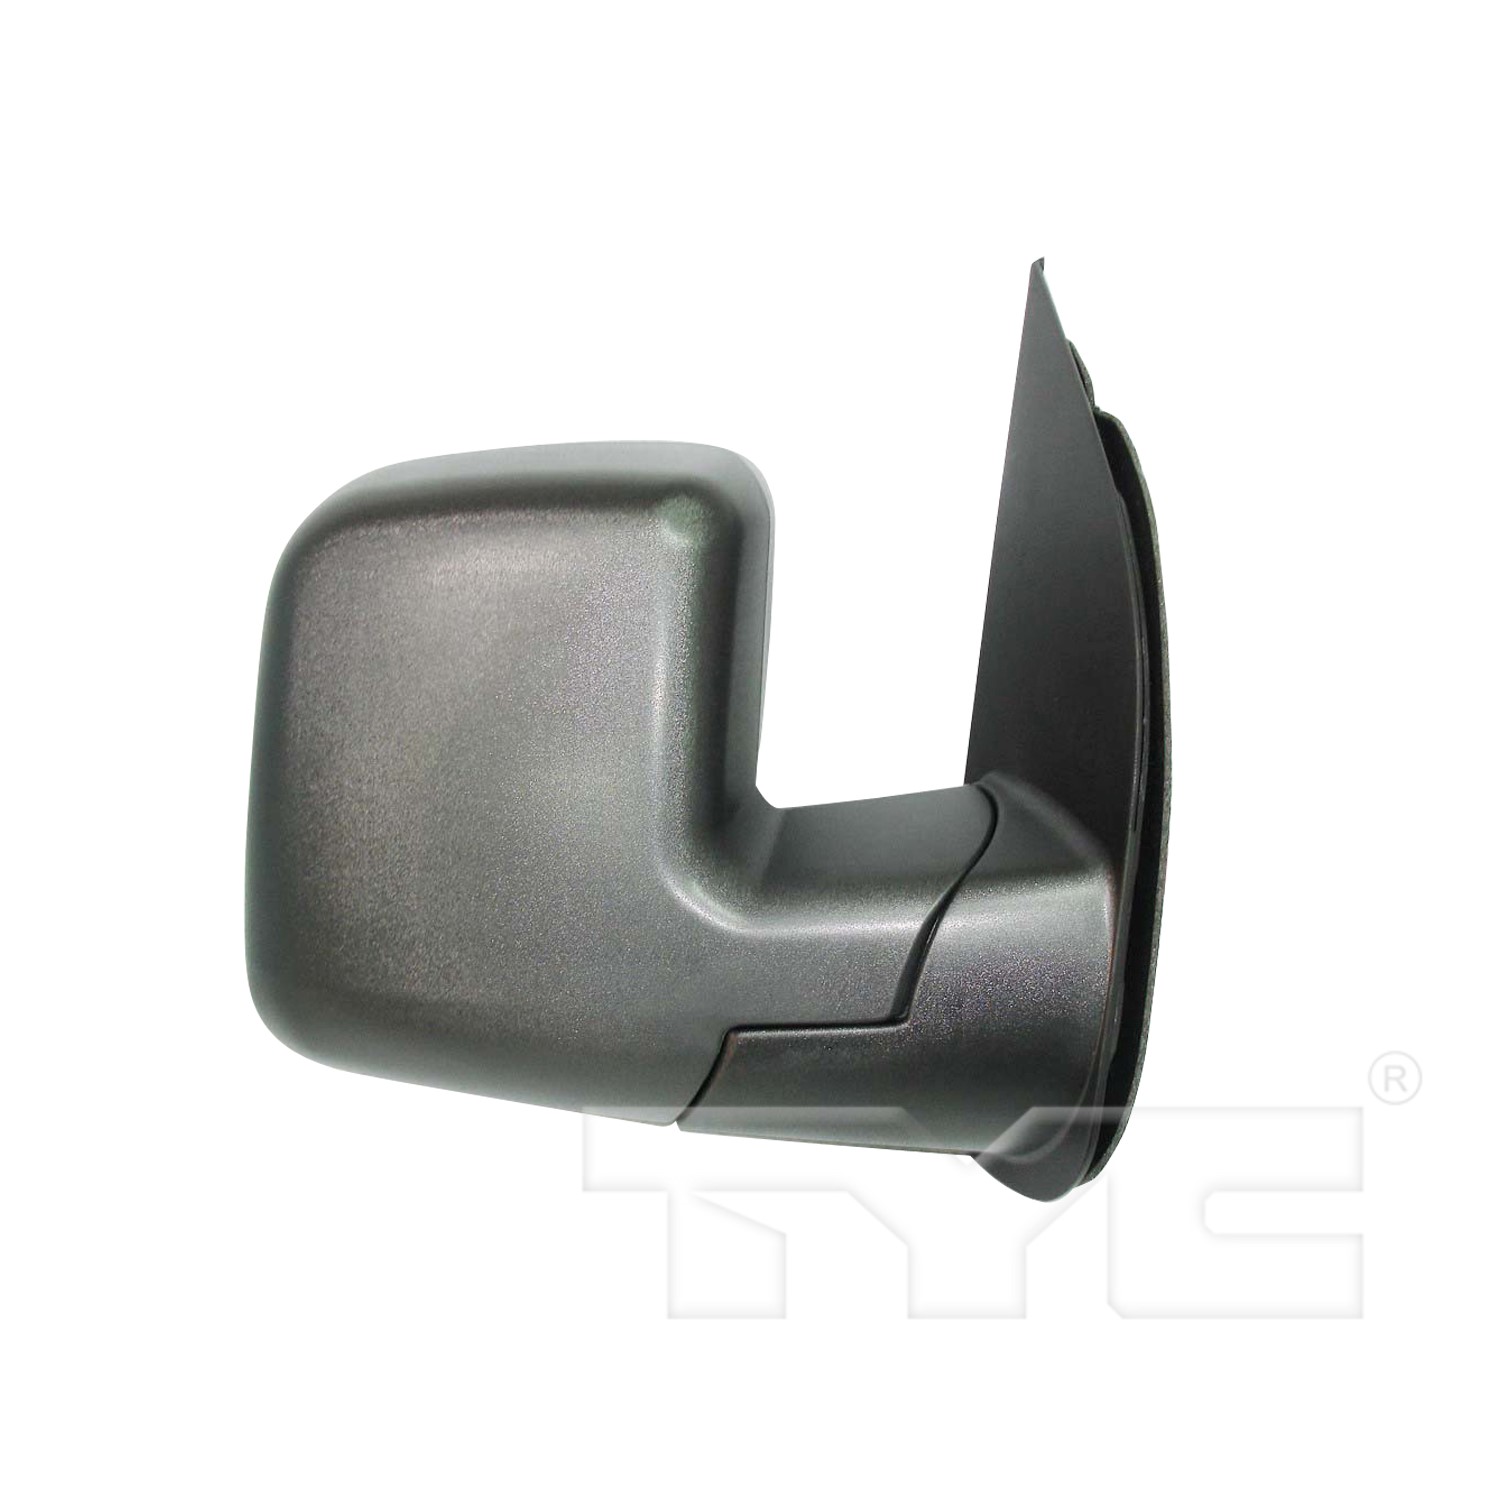 Aftermarket MIRRORS for FORD - E-350 SUPER DUTY, E-350 SUPER DUTY,02-07,RT Mirror outside rear view